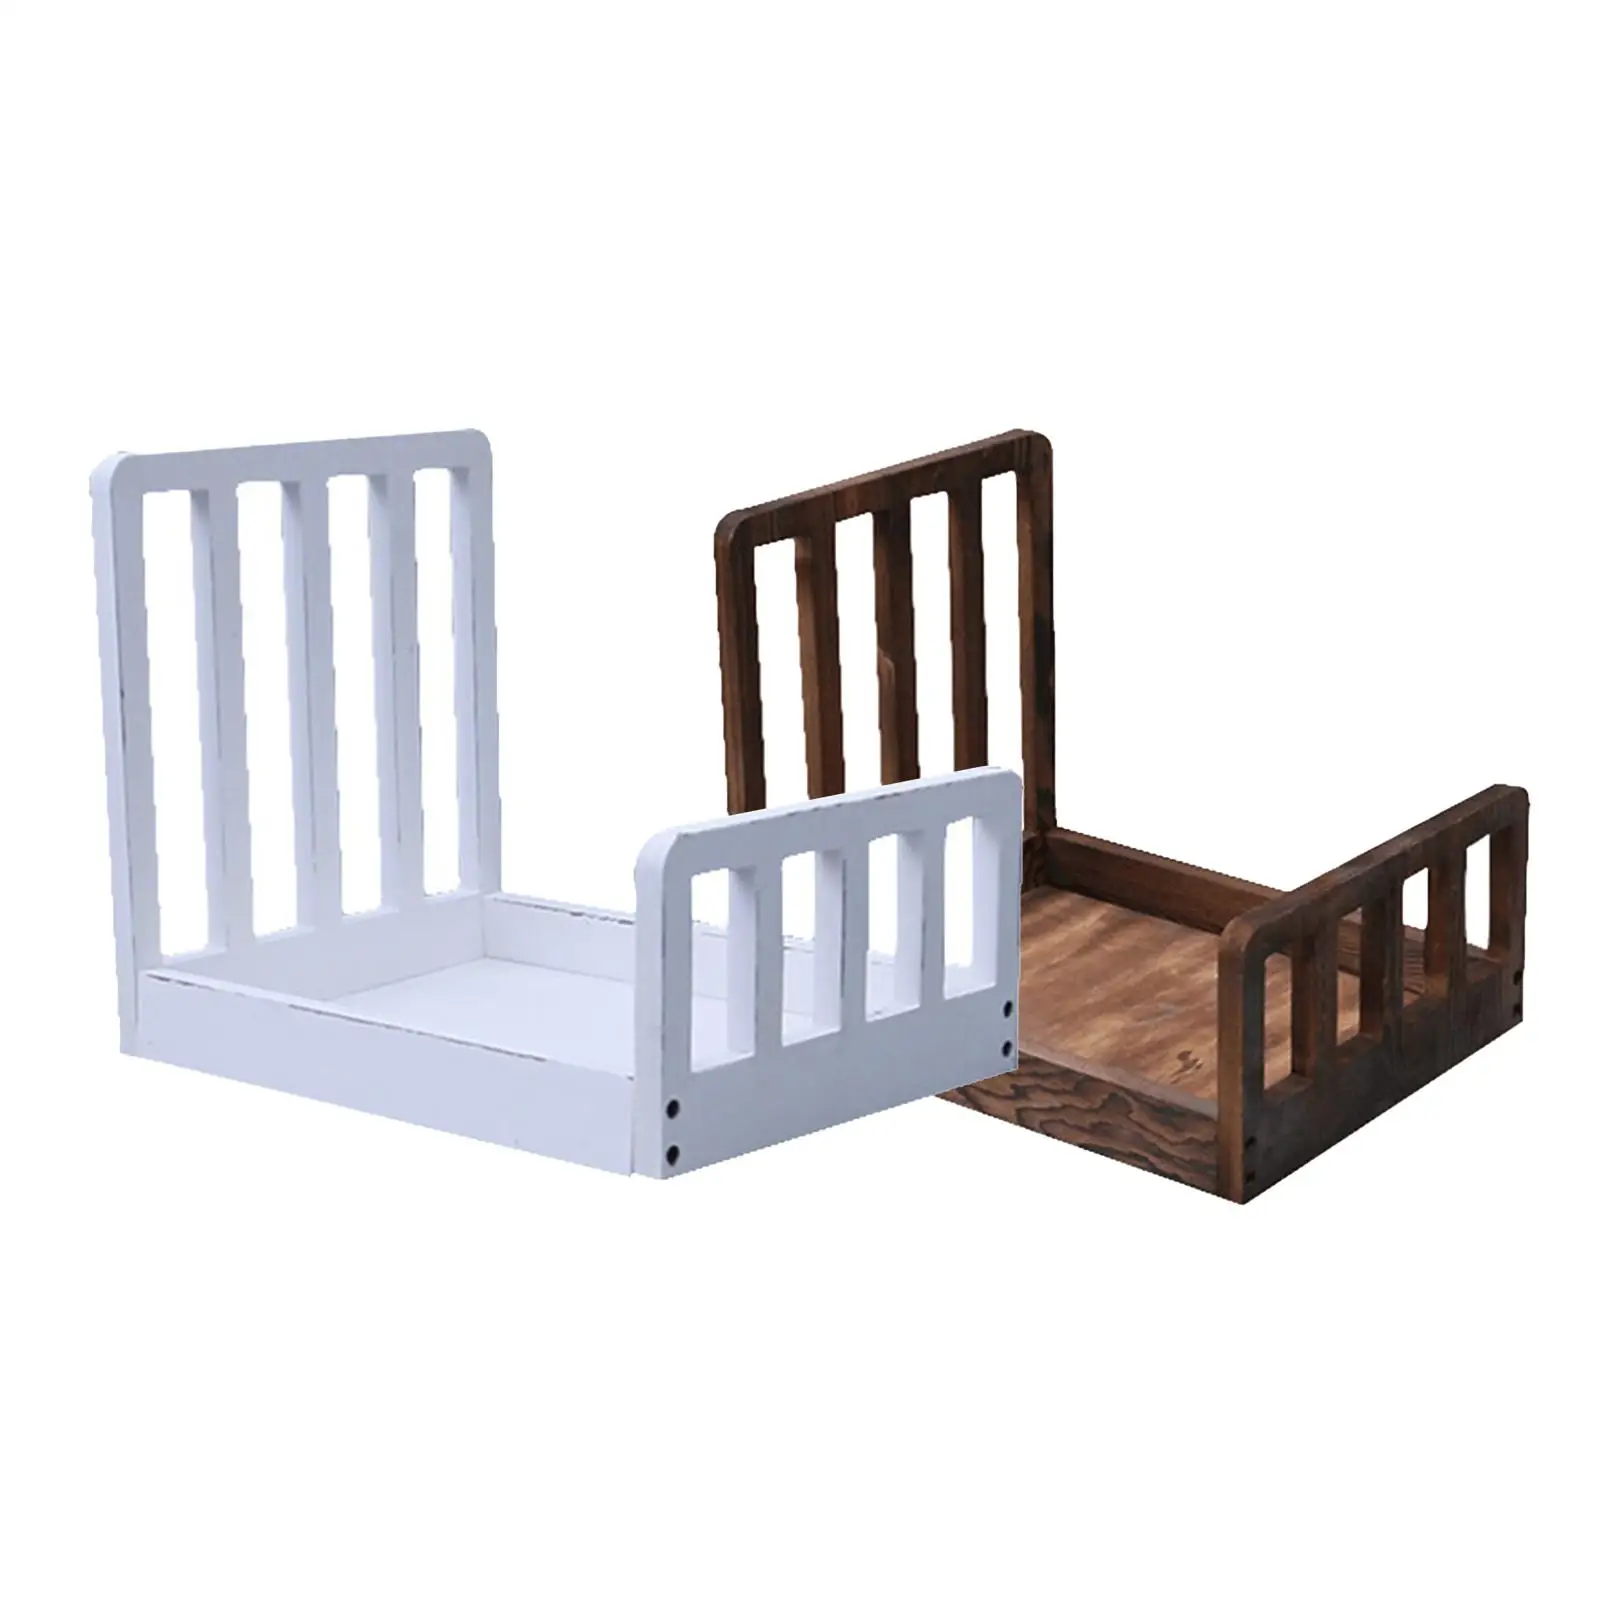 Photography Baby Bed Wooden Baby Shower Gifts Photo Backdrops Photoshoot Photoshoot Girls Posing Assisted Infant Small Furniture